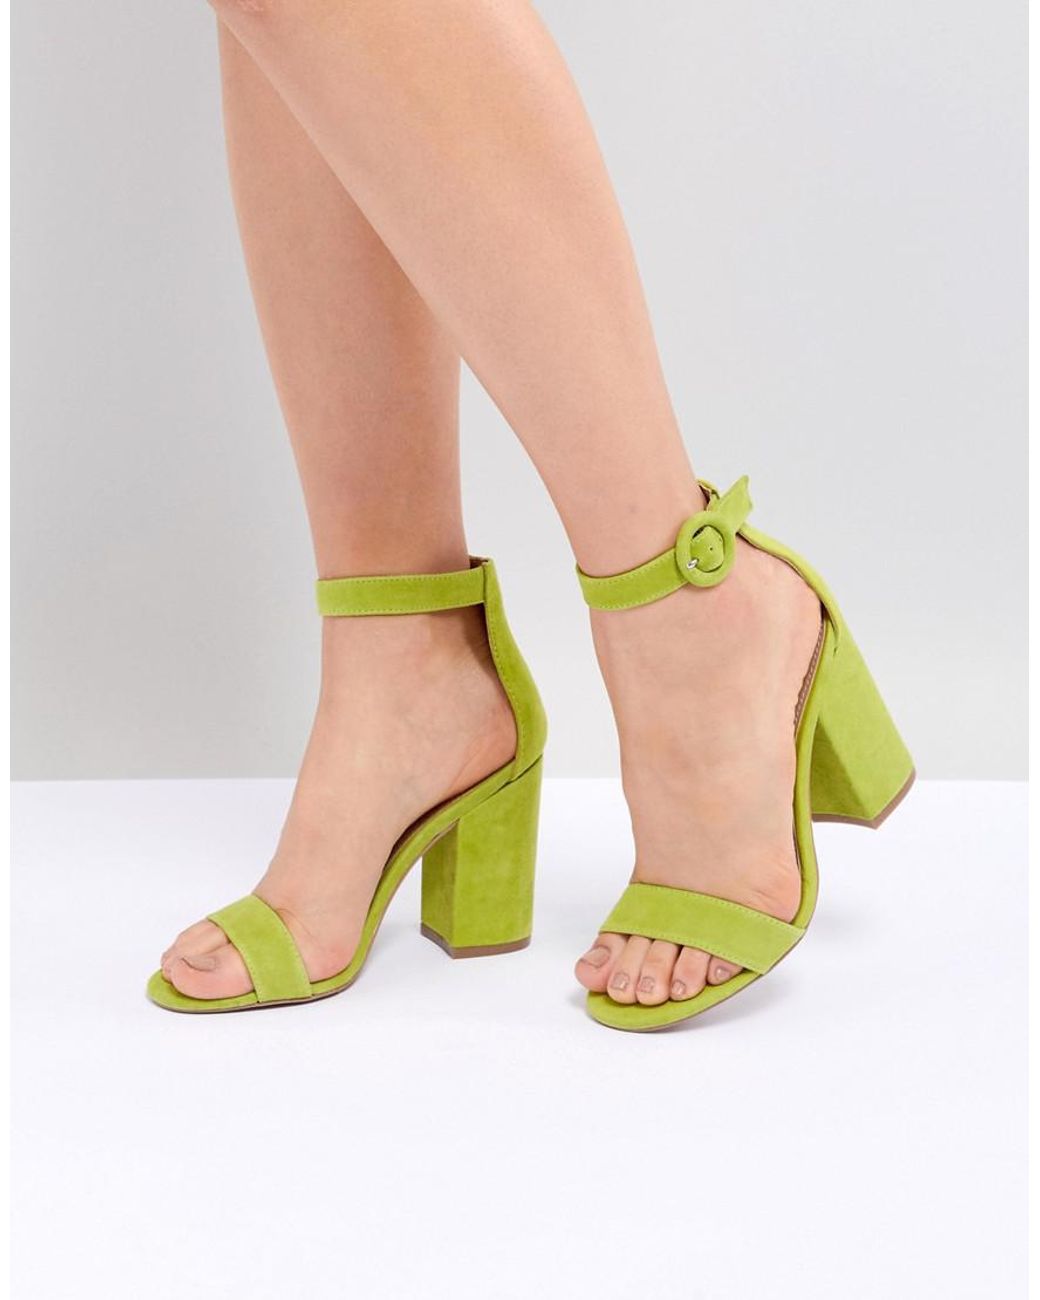 Steve Madden Friday Lime Suede Buckle Heeled Sandals in Green - Lyst